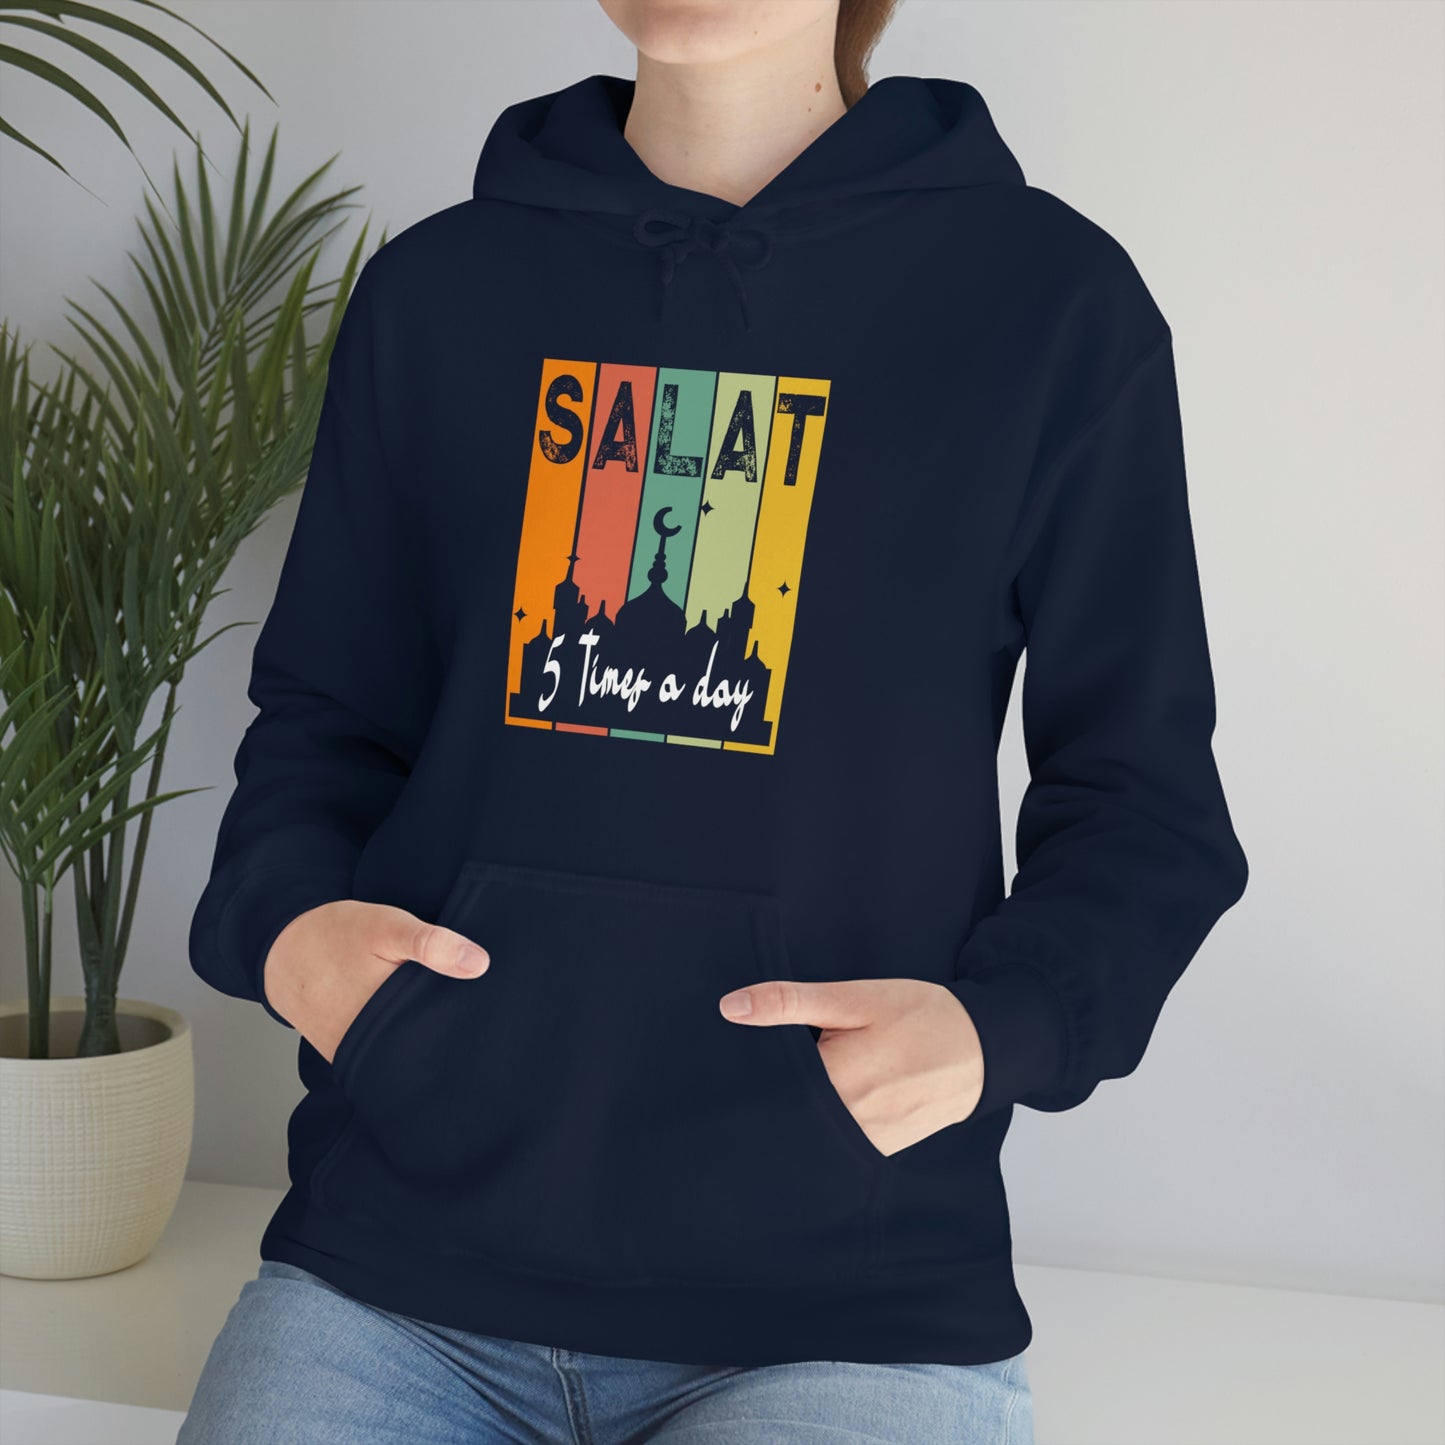 Cool Vintage Halal Design for Kids and Adults "First Salat 5 Times Day" For Muslim Prayer remembrance Unisex Soft style Hooded Sweatshirt